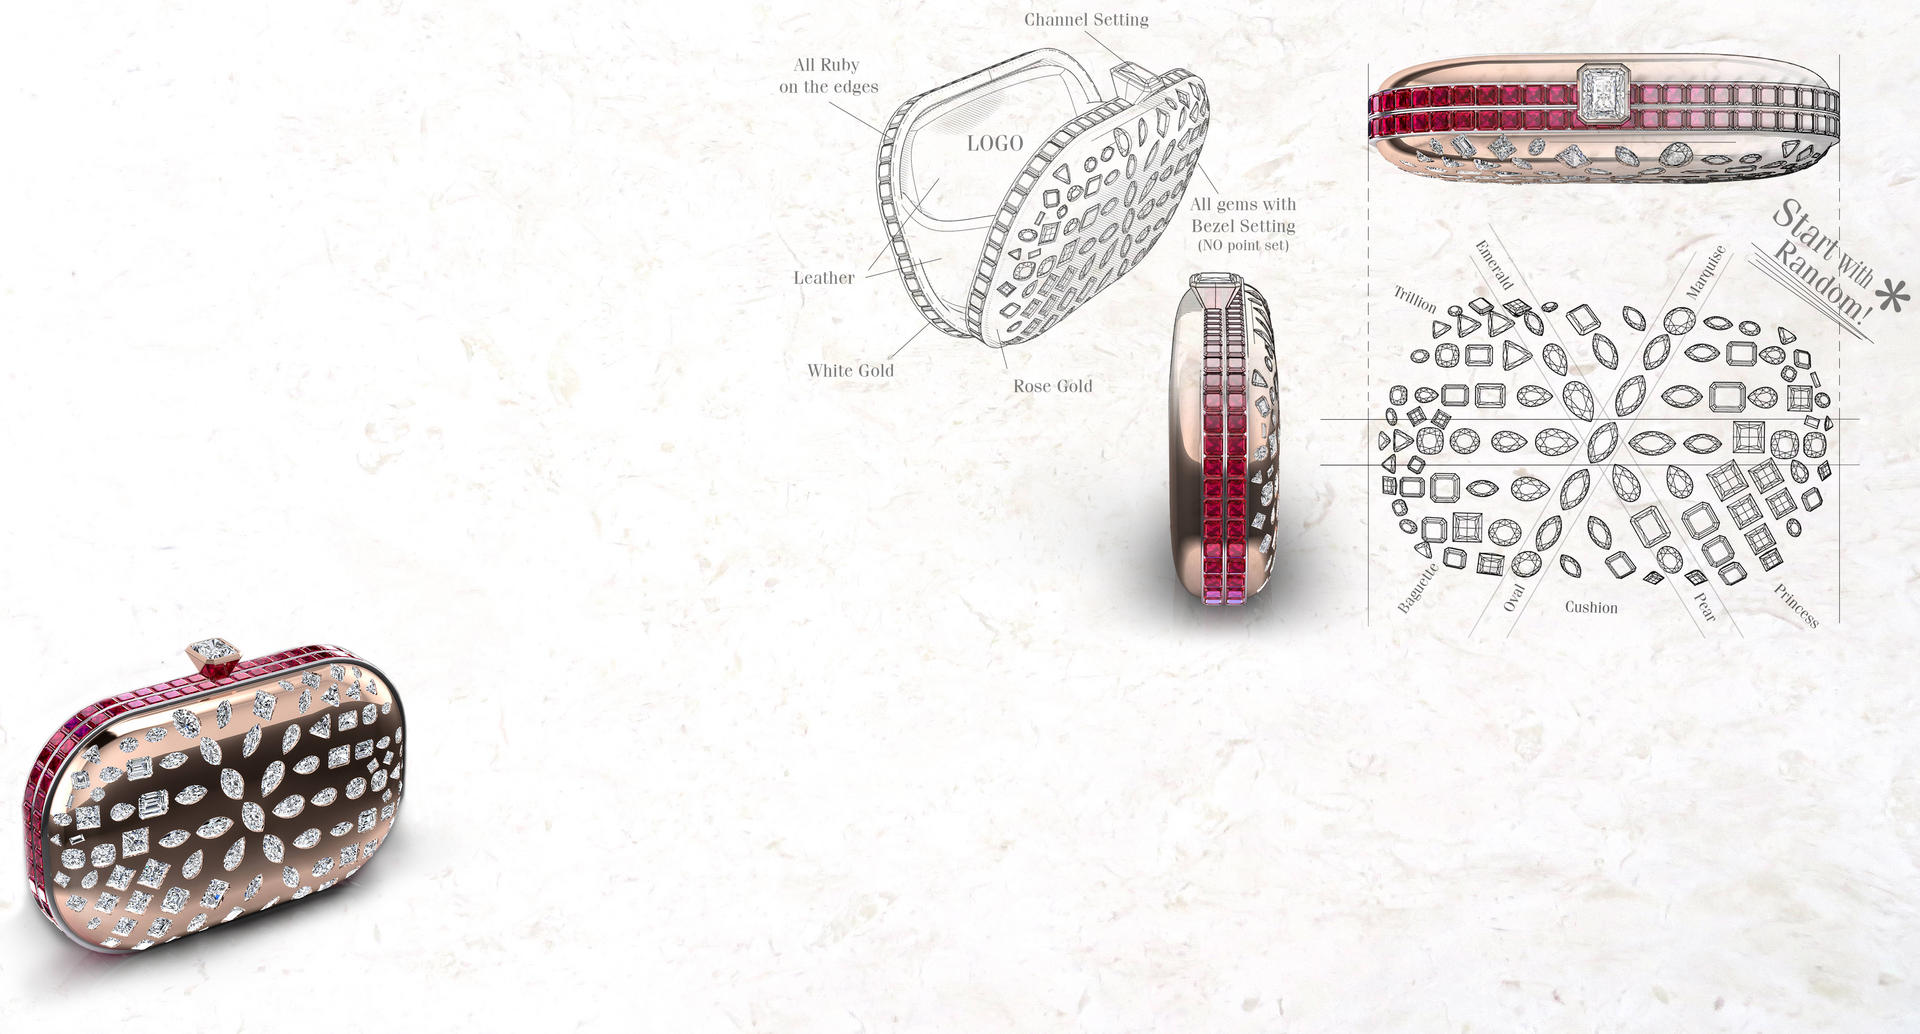 The luxury minaudière is decorated with a total of 89 diamonds, which range from 1ct to 3.5ct each. The diamonds have different shapes and sizes and are complemented with Burmese rubies. Illustration: Pour la Vie